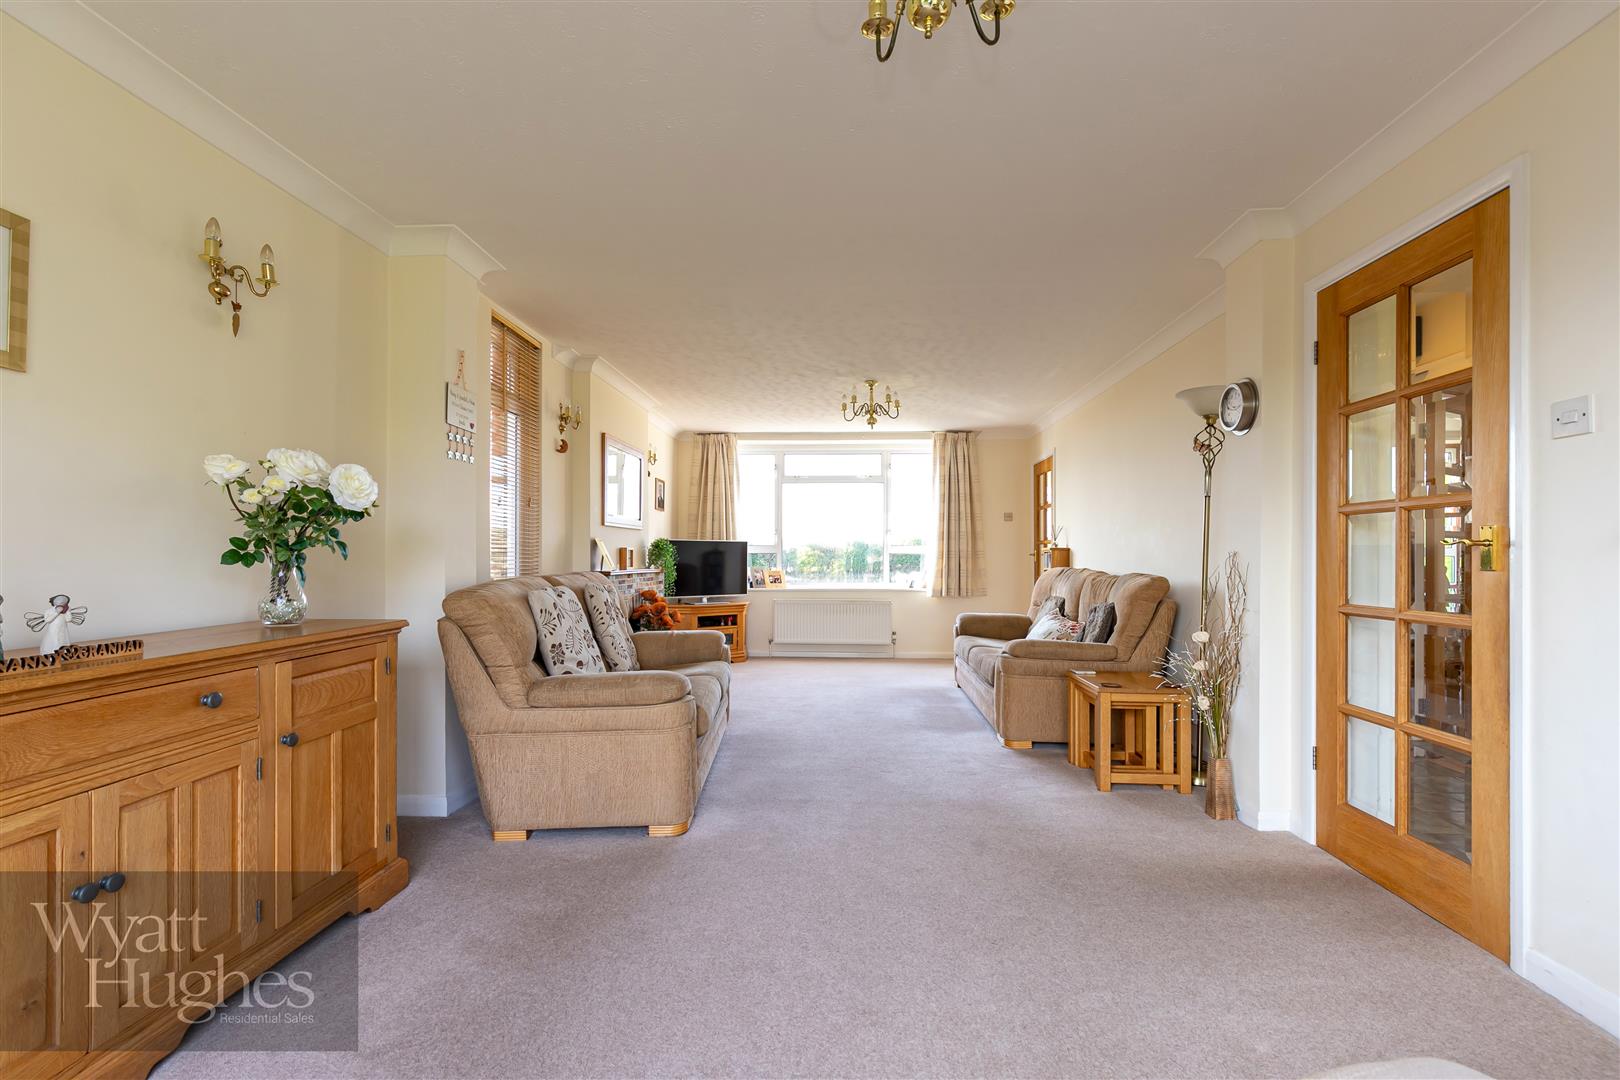 4 bed detached house for sale in Bexhill Road, Ninfield, Battle  - Property Image 10